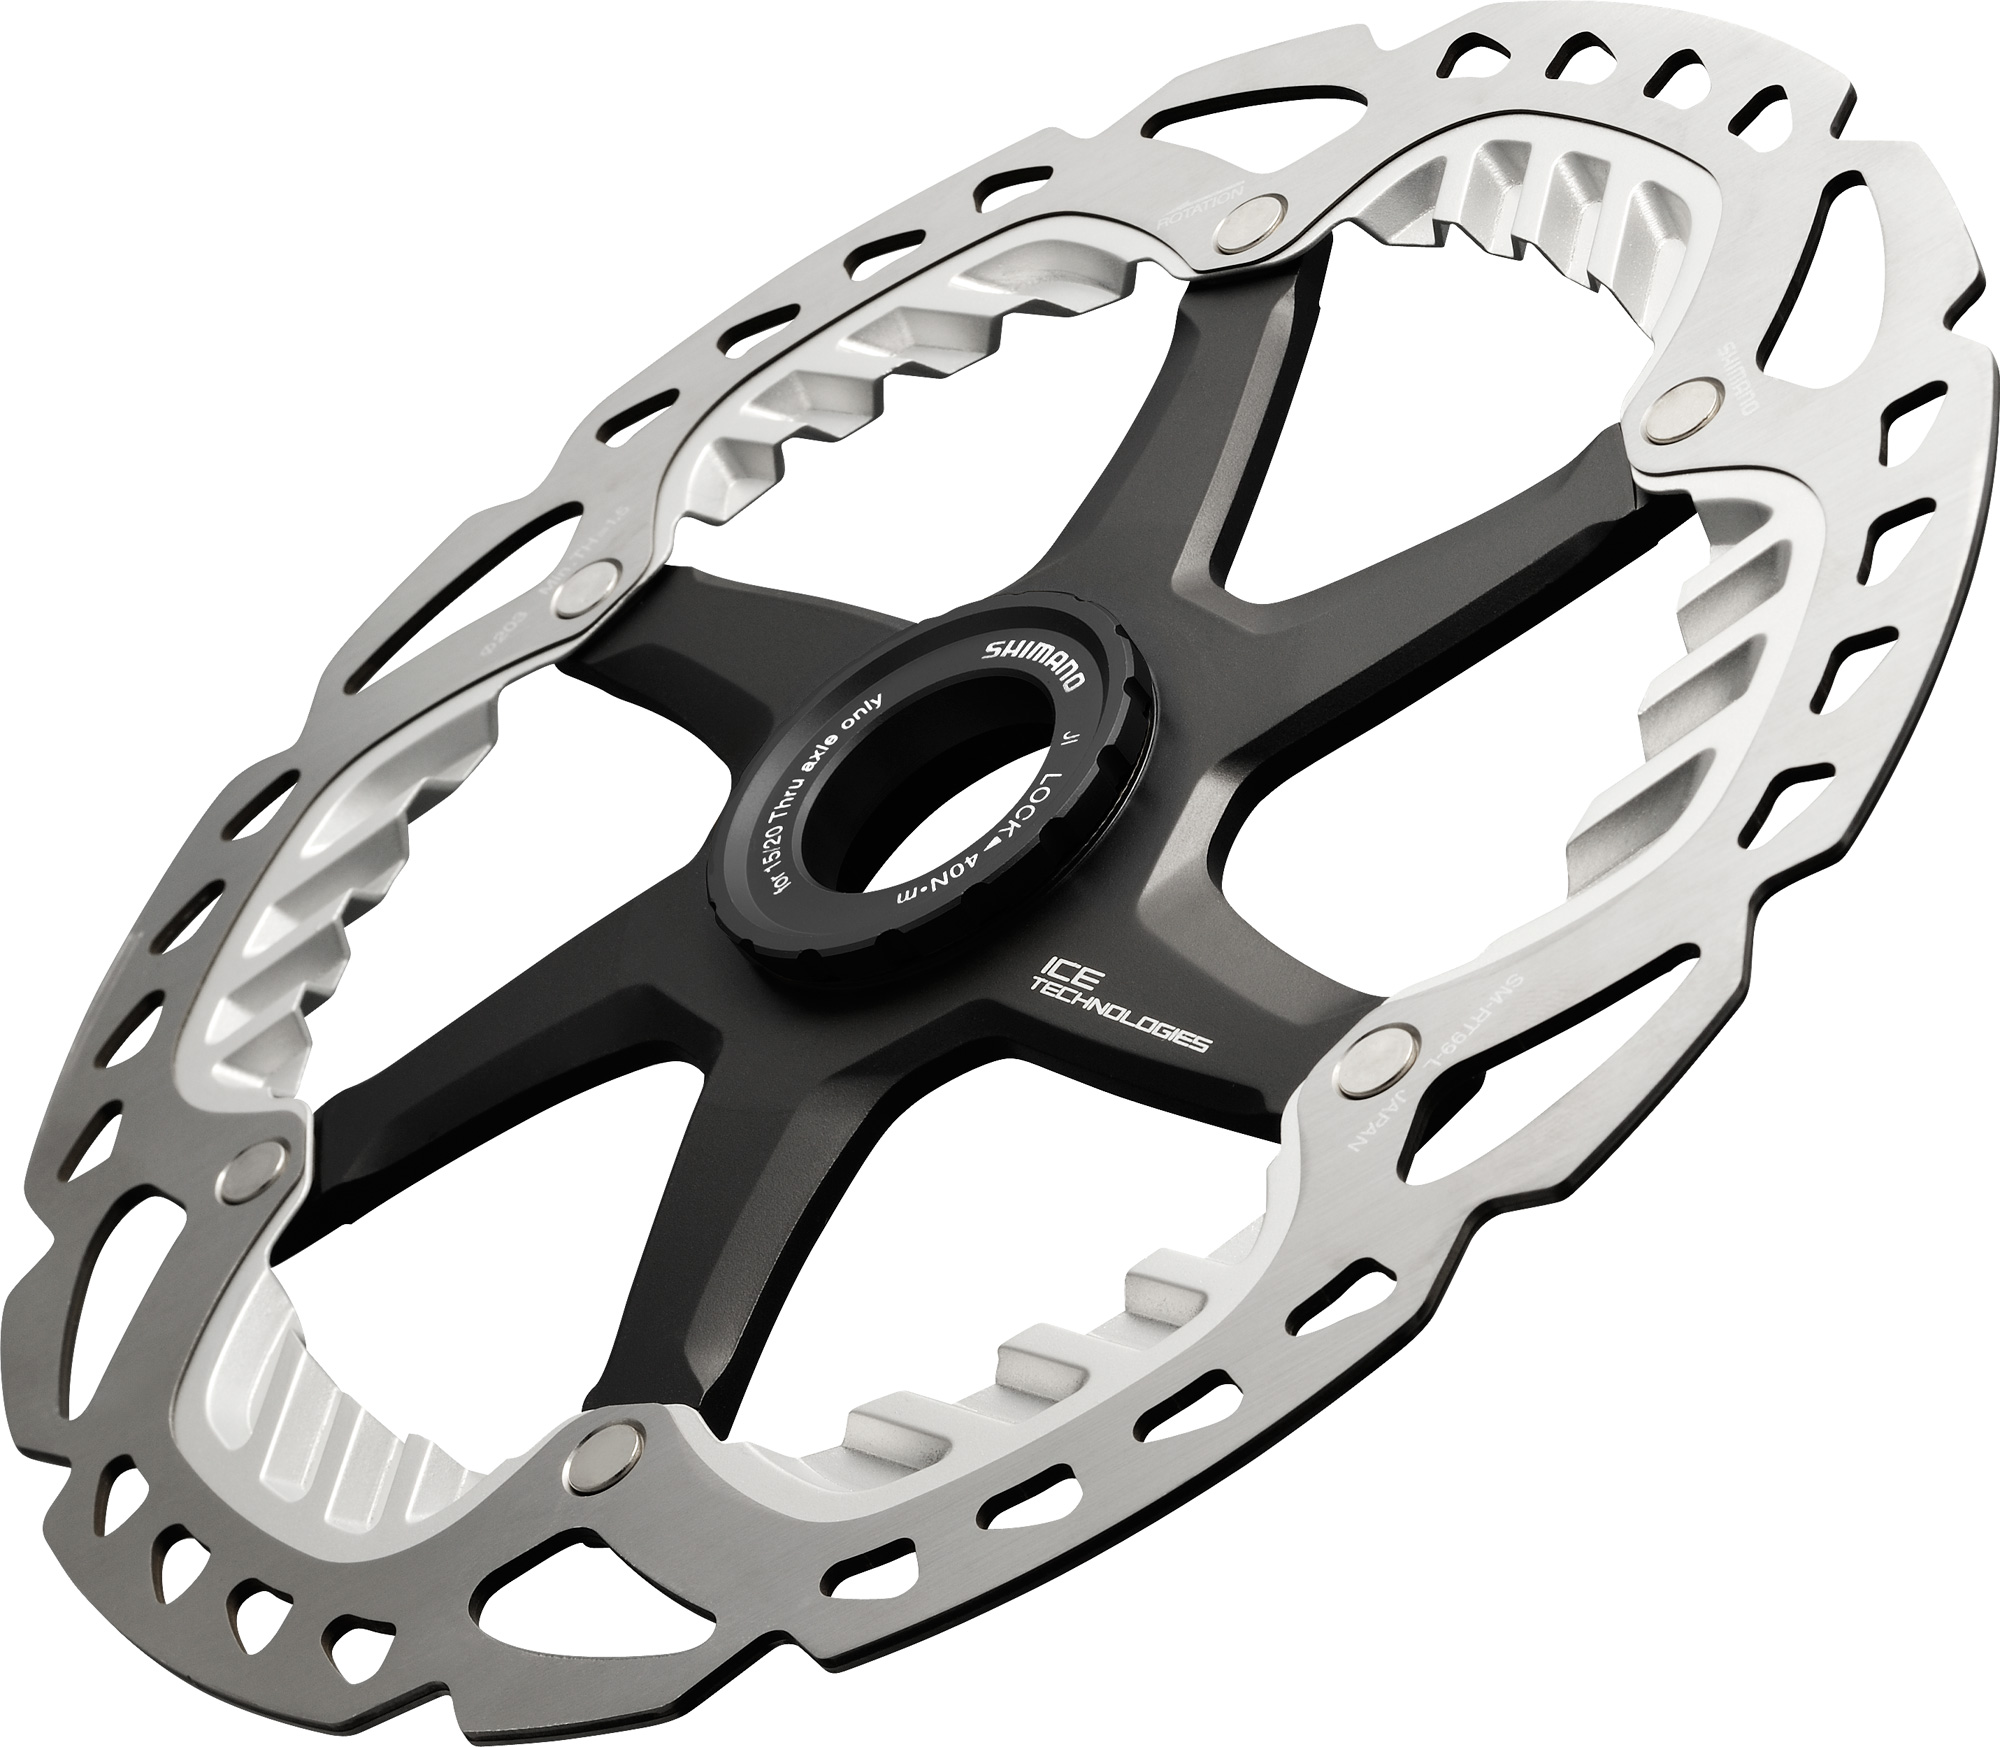 Shimano Saint Disc Brake Rotor (203mm) - Cap's Bicycle Shop & Cap's Museum,  New Westminster and Port Moody BC